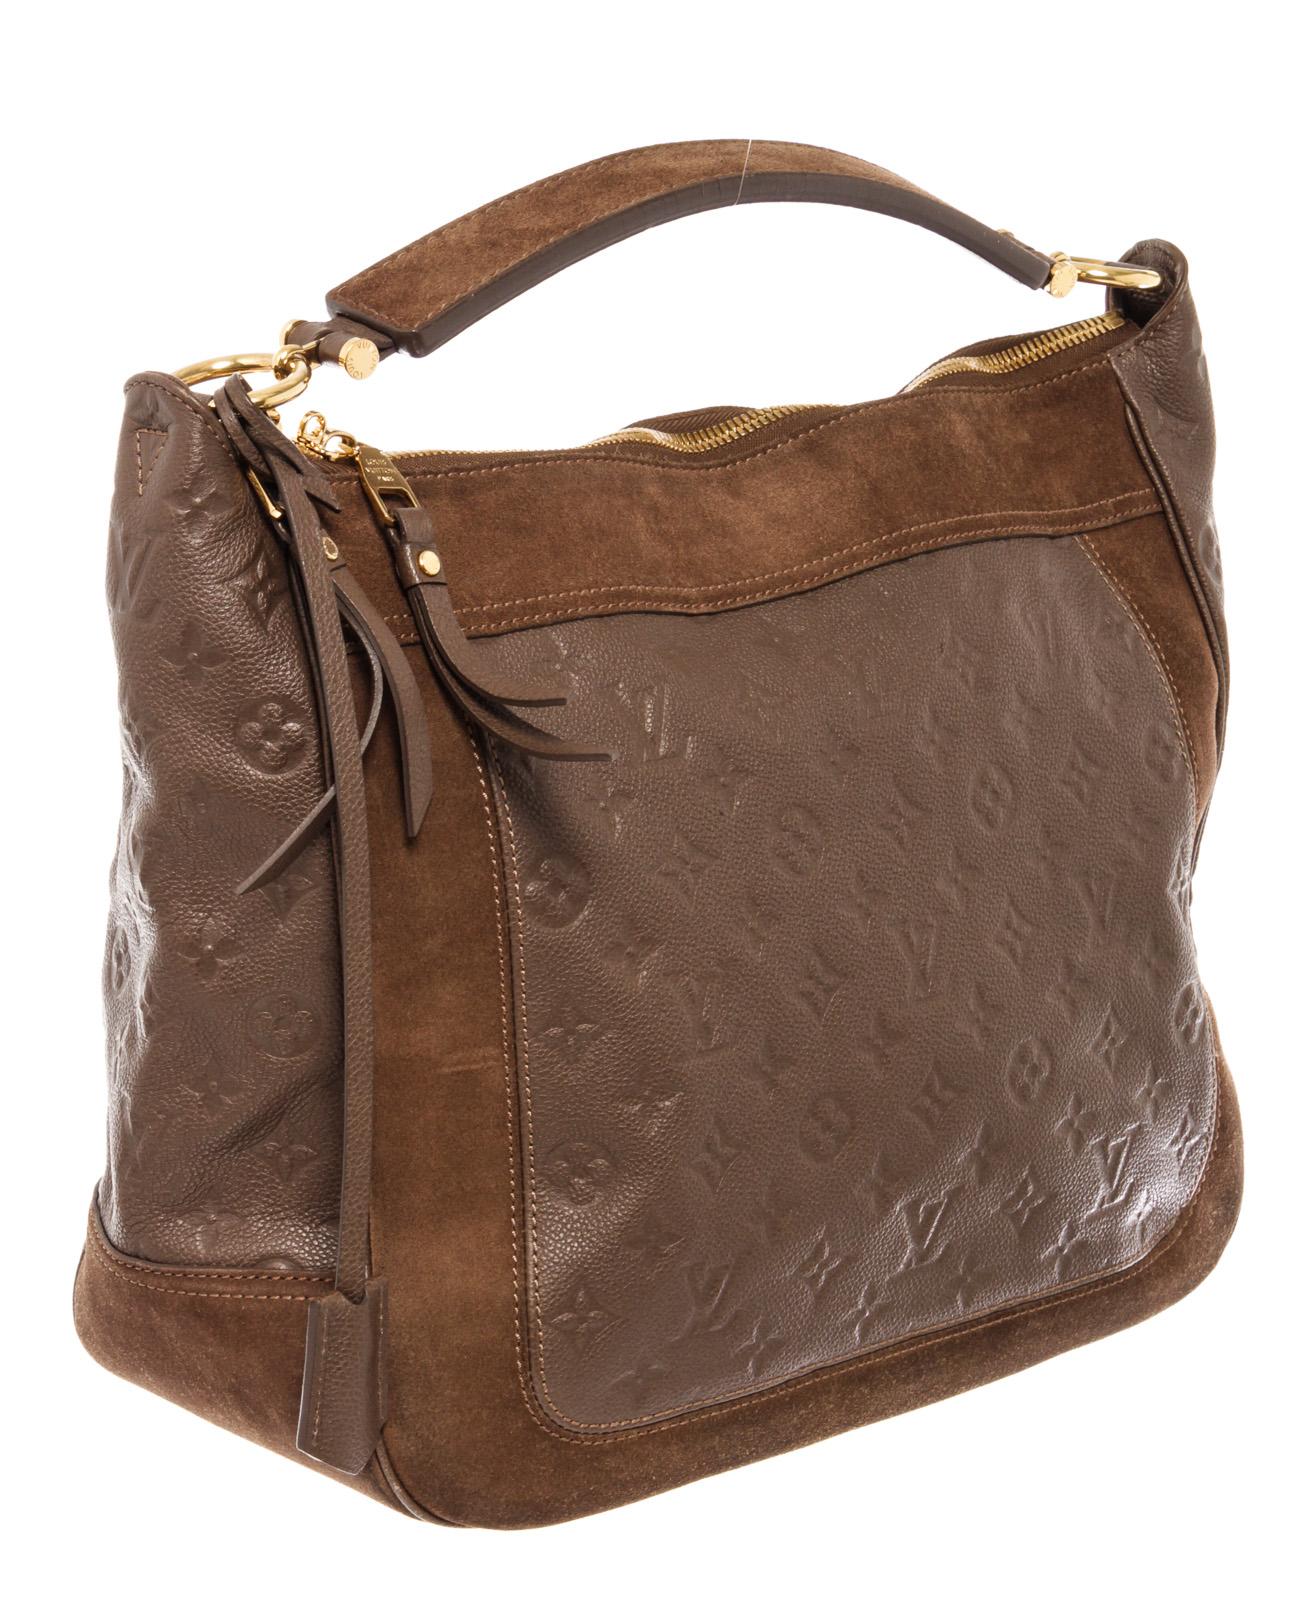 Louis Vuitton Audacieuse MM Bag is a unique combination of suede and embossed Empreinte leather in thick panels along with gold-tone hardware, two flat pockets, one zip pocket, flat leather shoulder strap and a removable, adjustable shoulder strap,